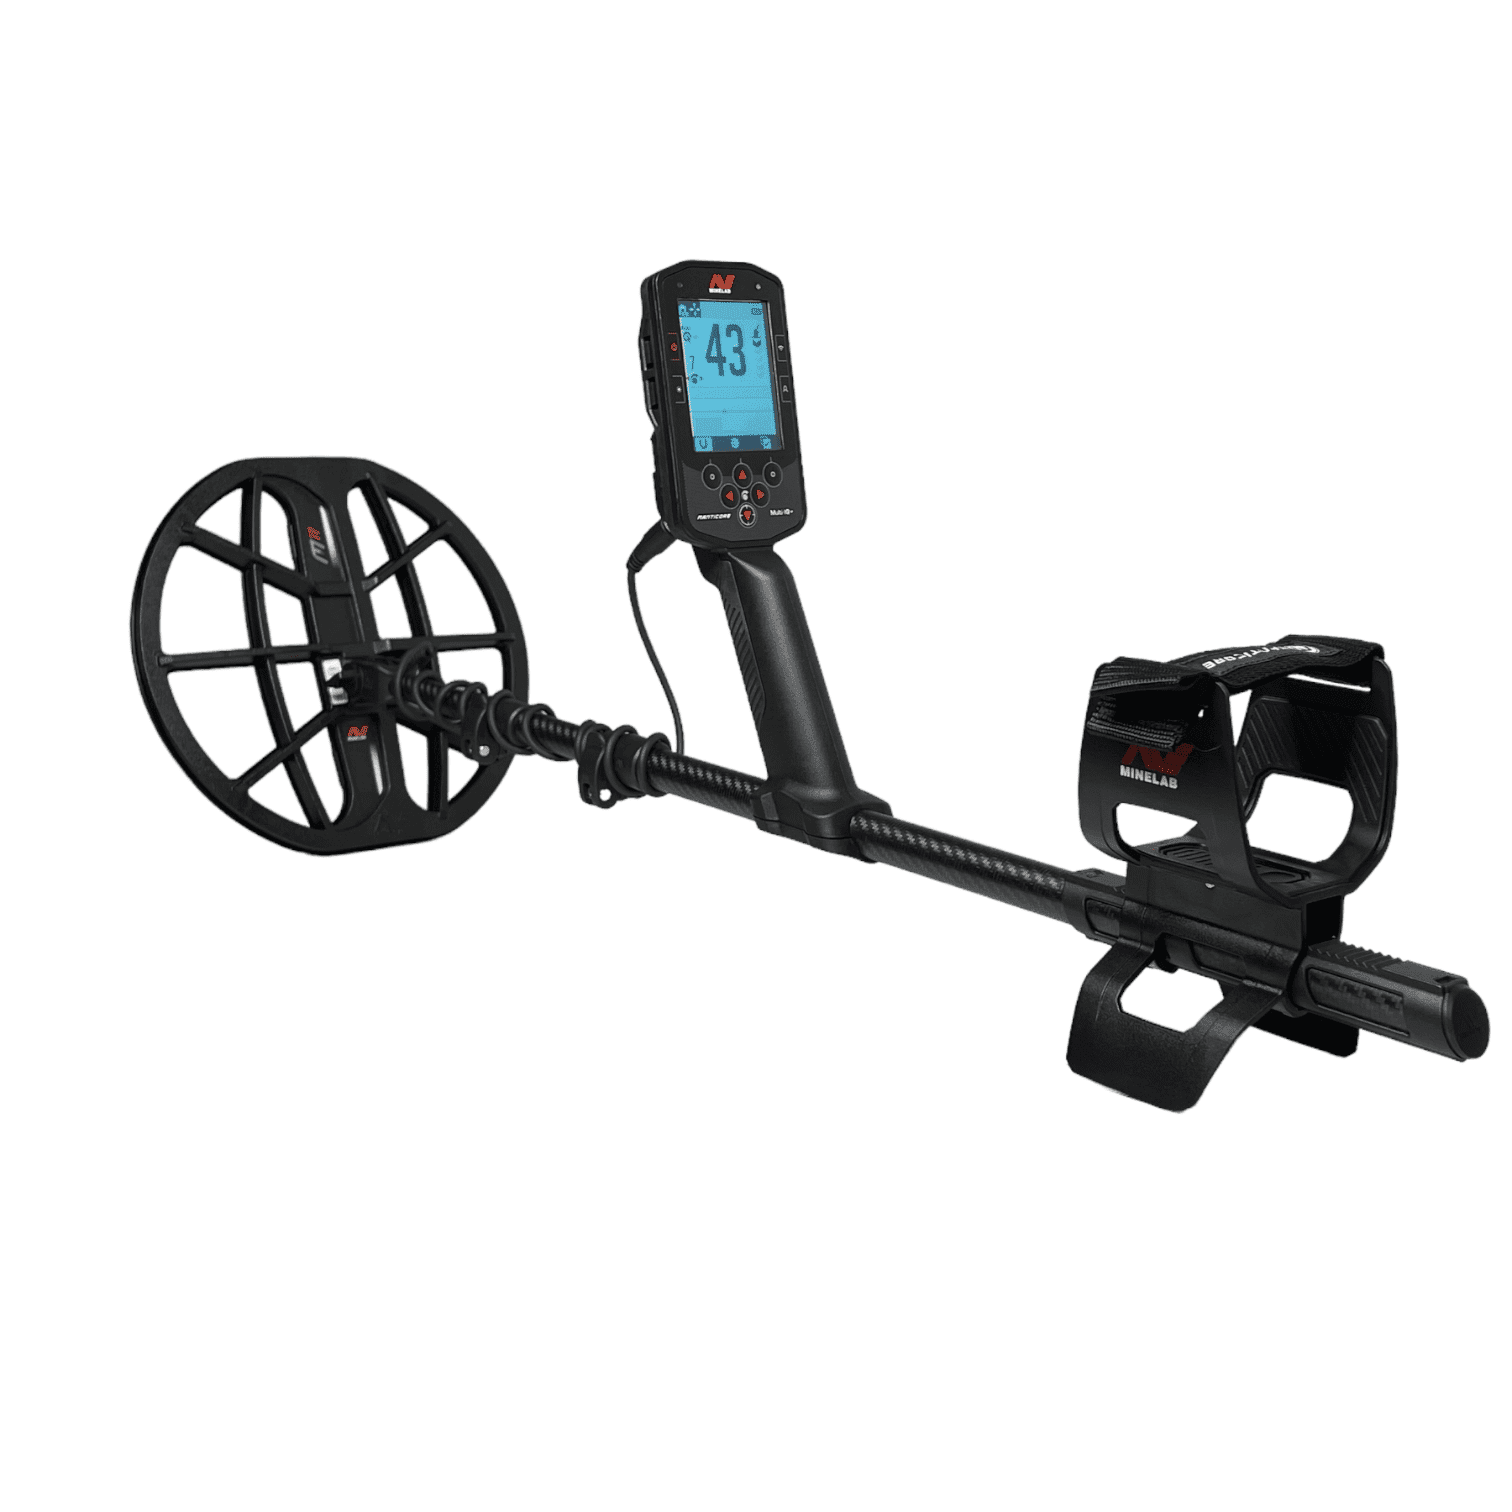 Minelab Manticore High Power Metal Detector and Pro-Find 40 Pinpointer with FREE Gear